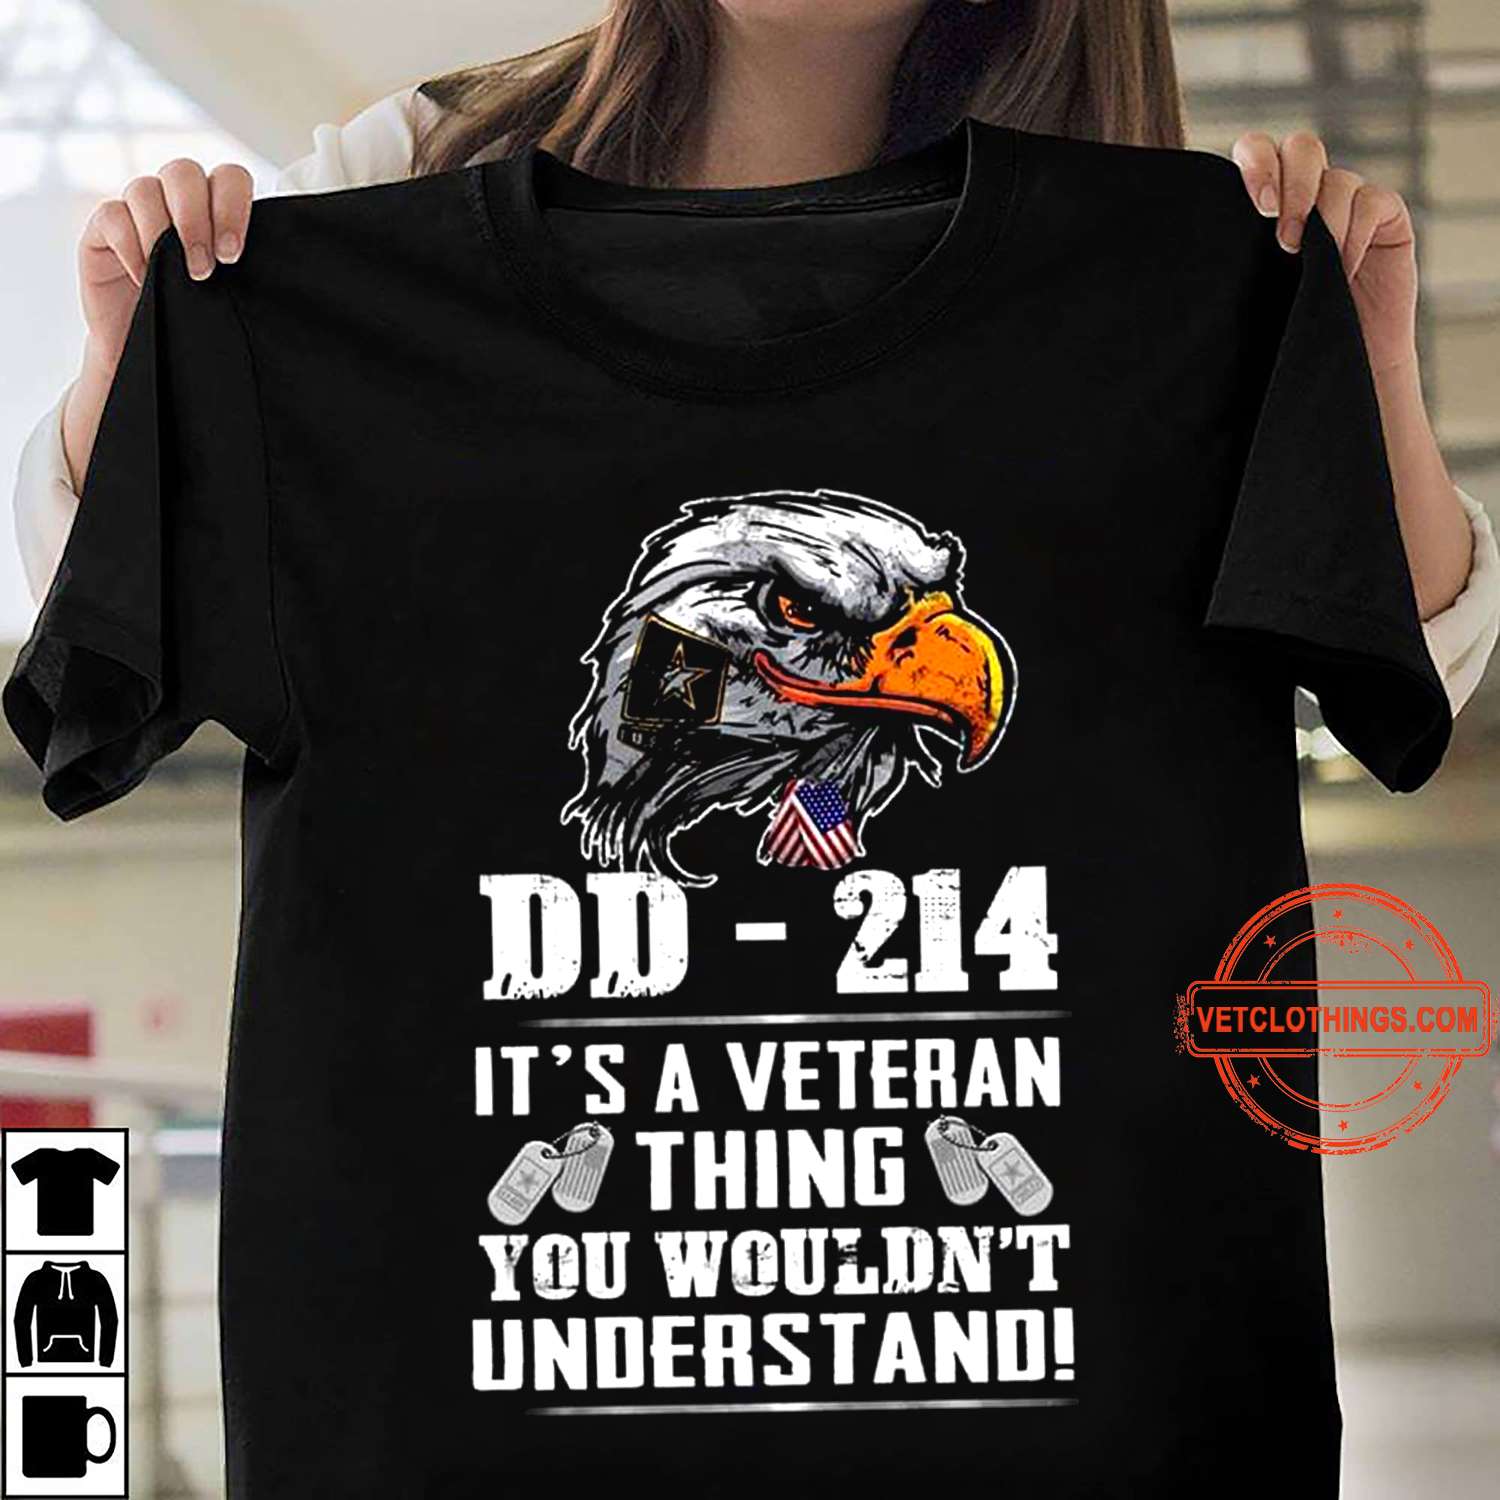 DD-214 It's a veteran thing you wouldn't understand - America veteran